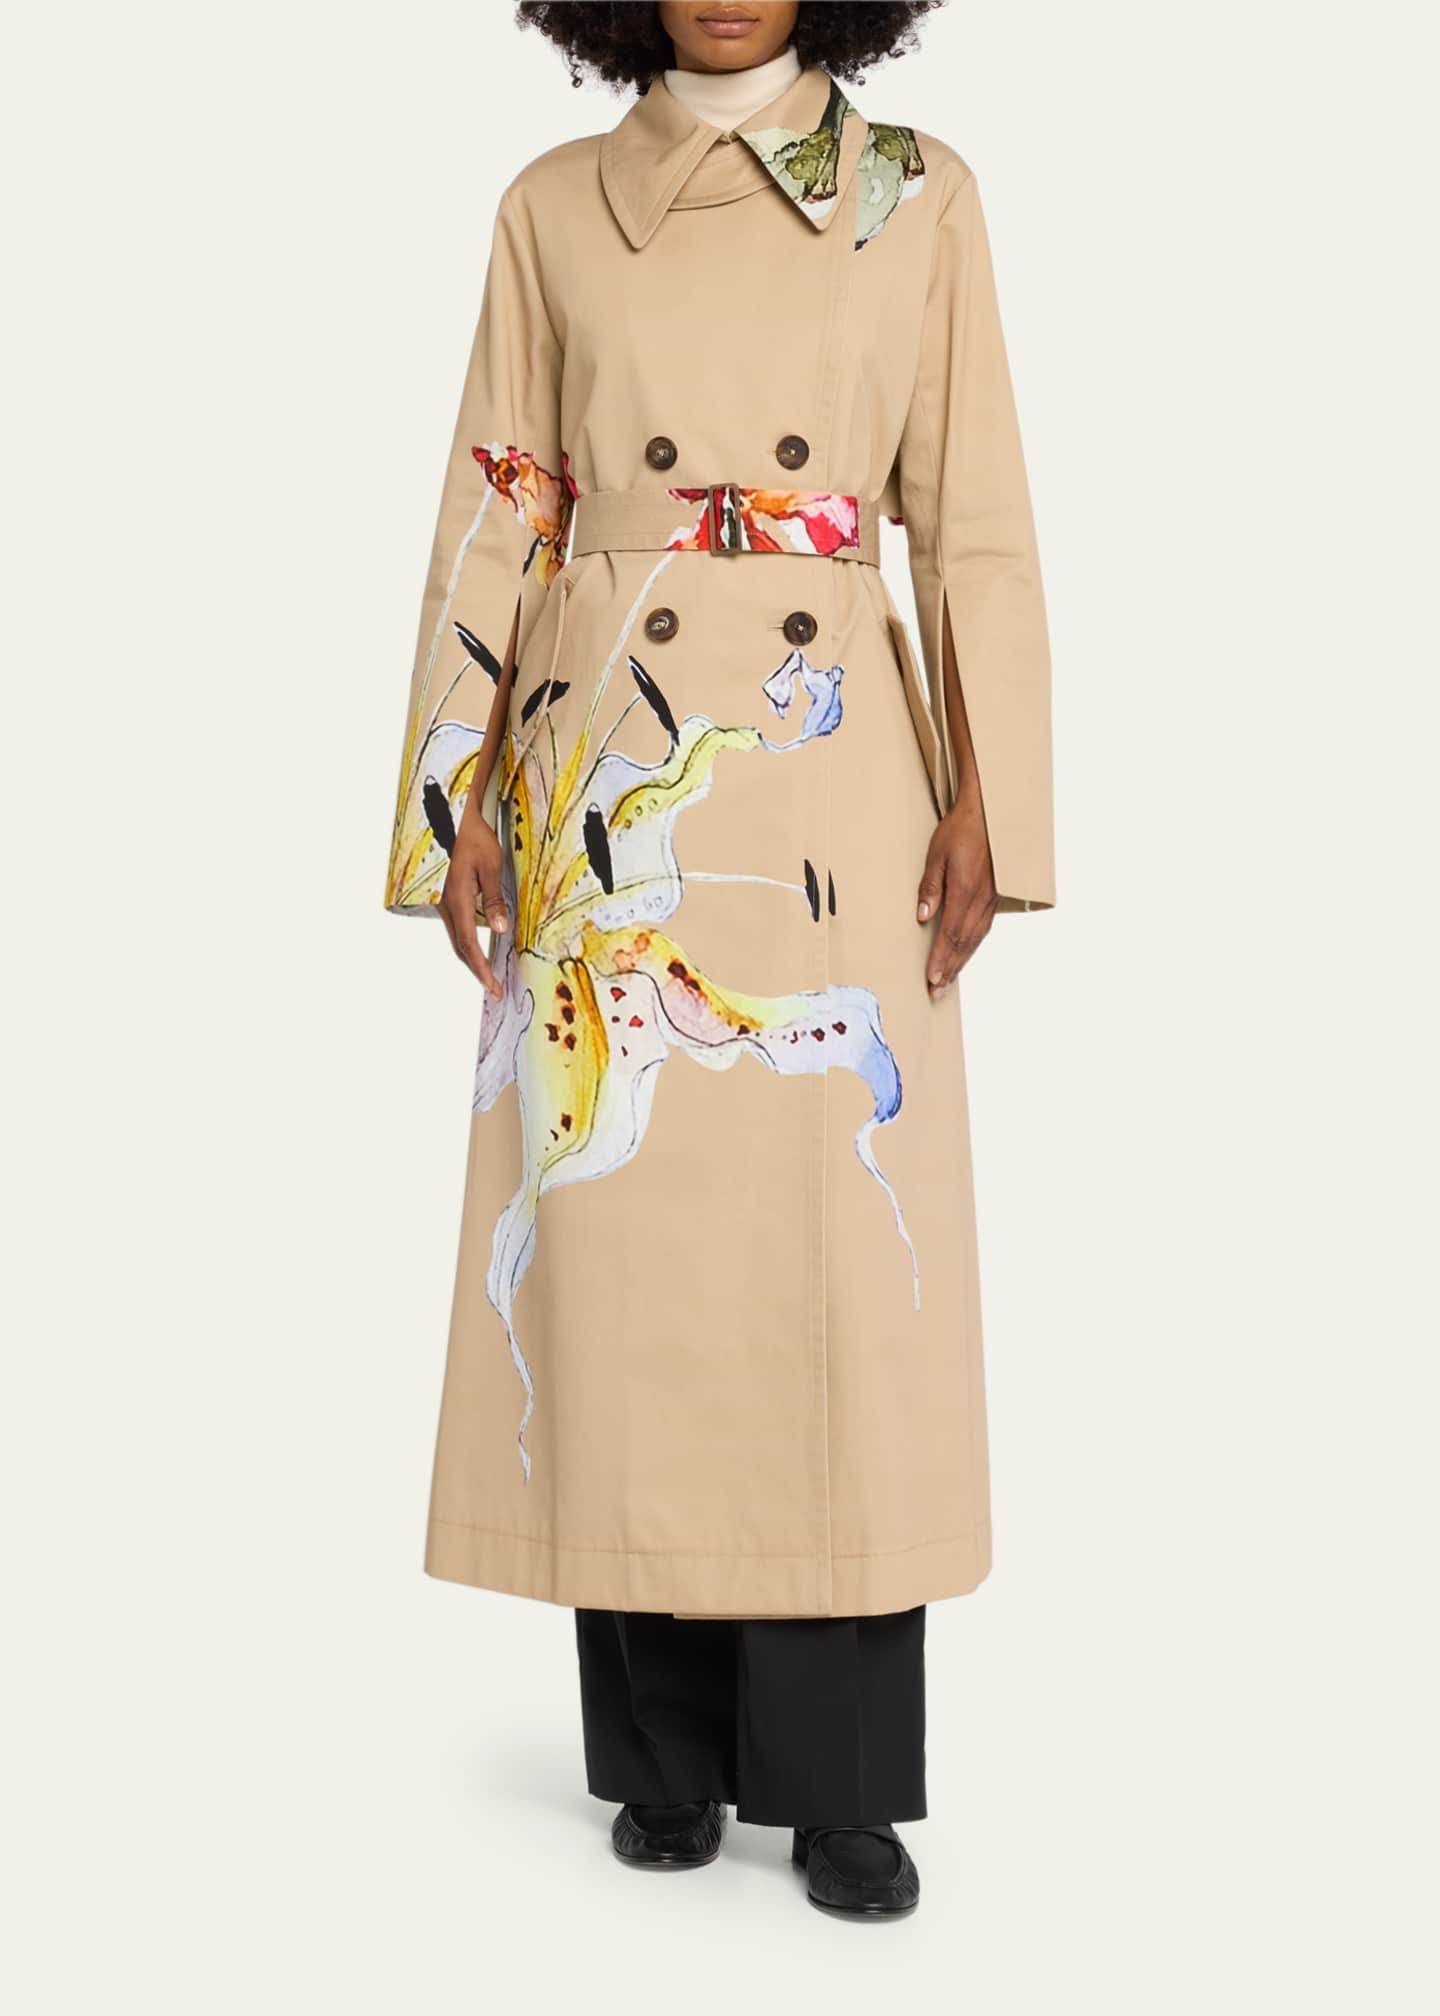 Jason Wu Collection Floral Printed Trench Coat with Tie Belt - Bergdorf ...